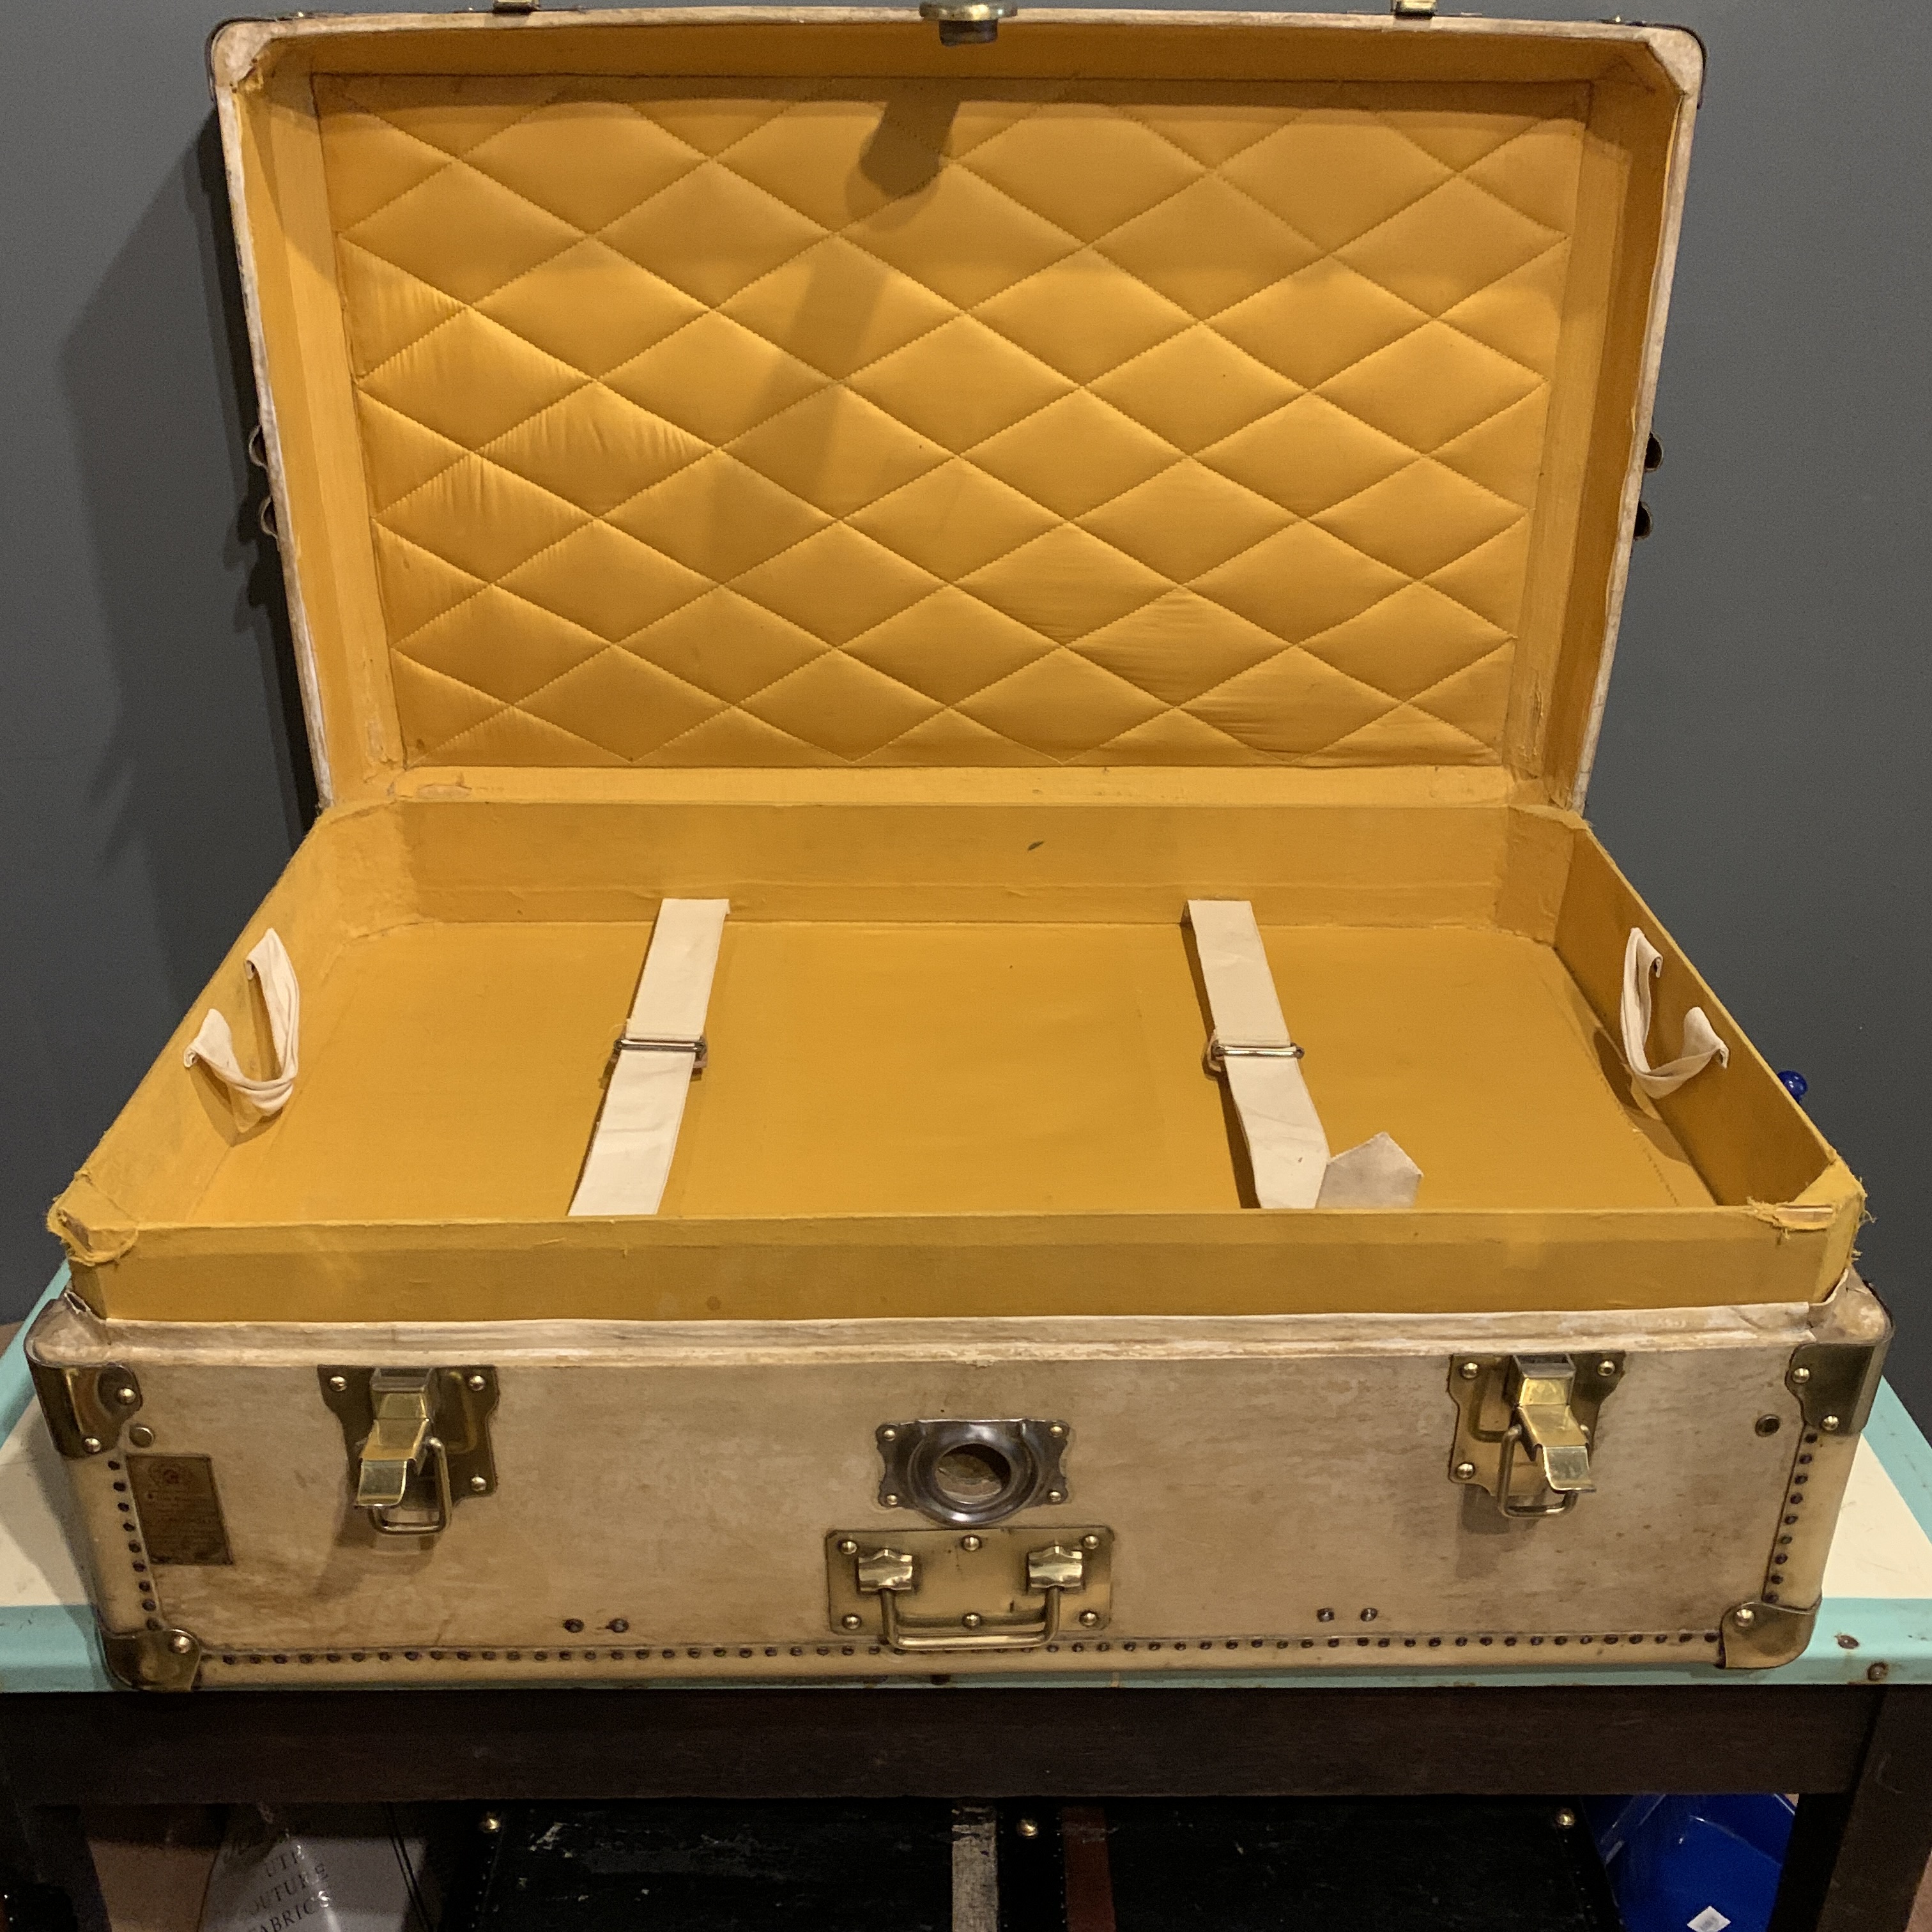 An early 20th century steamer trunk in cream vellum with polished brass locks and trim.